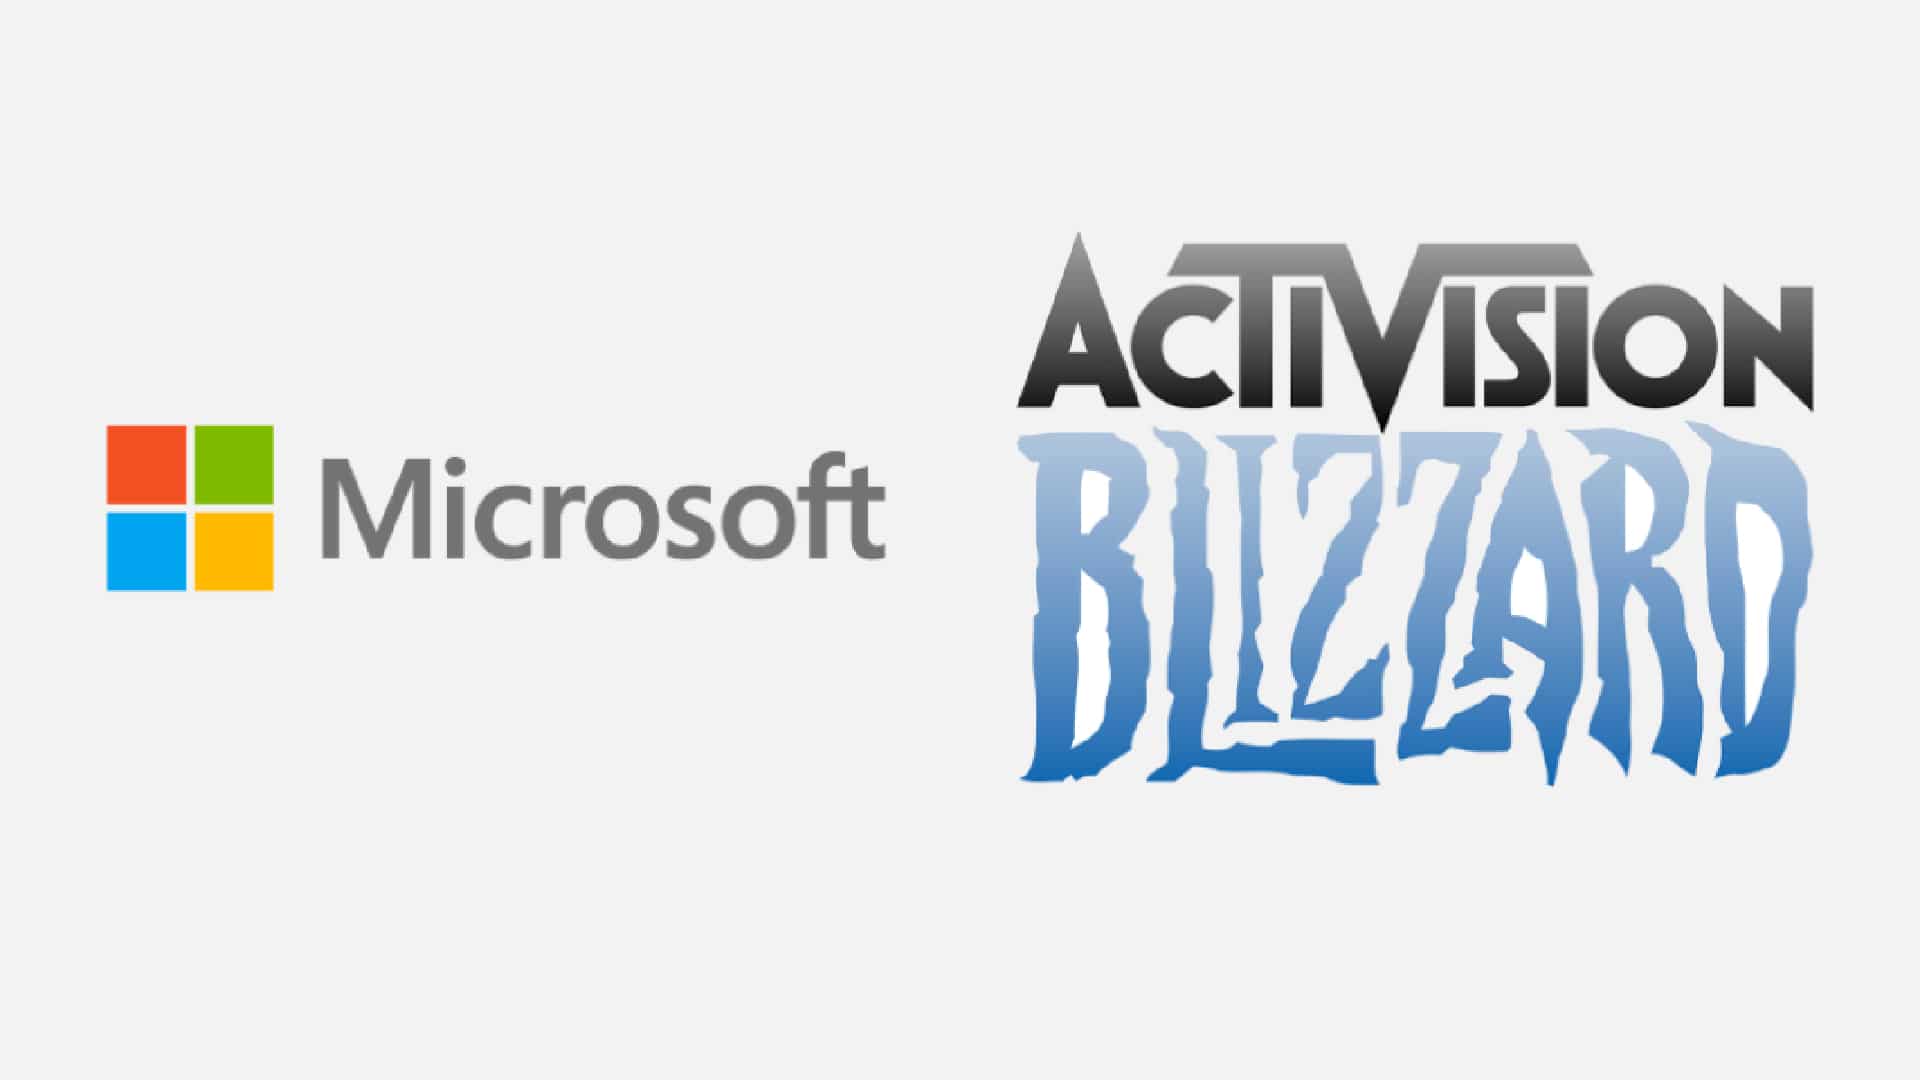 Microsoft is finally on the verge of closing its Activision deal